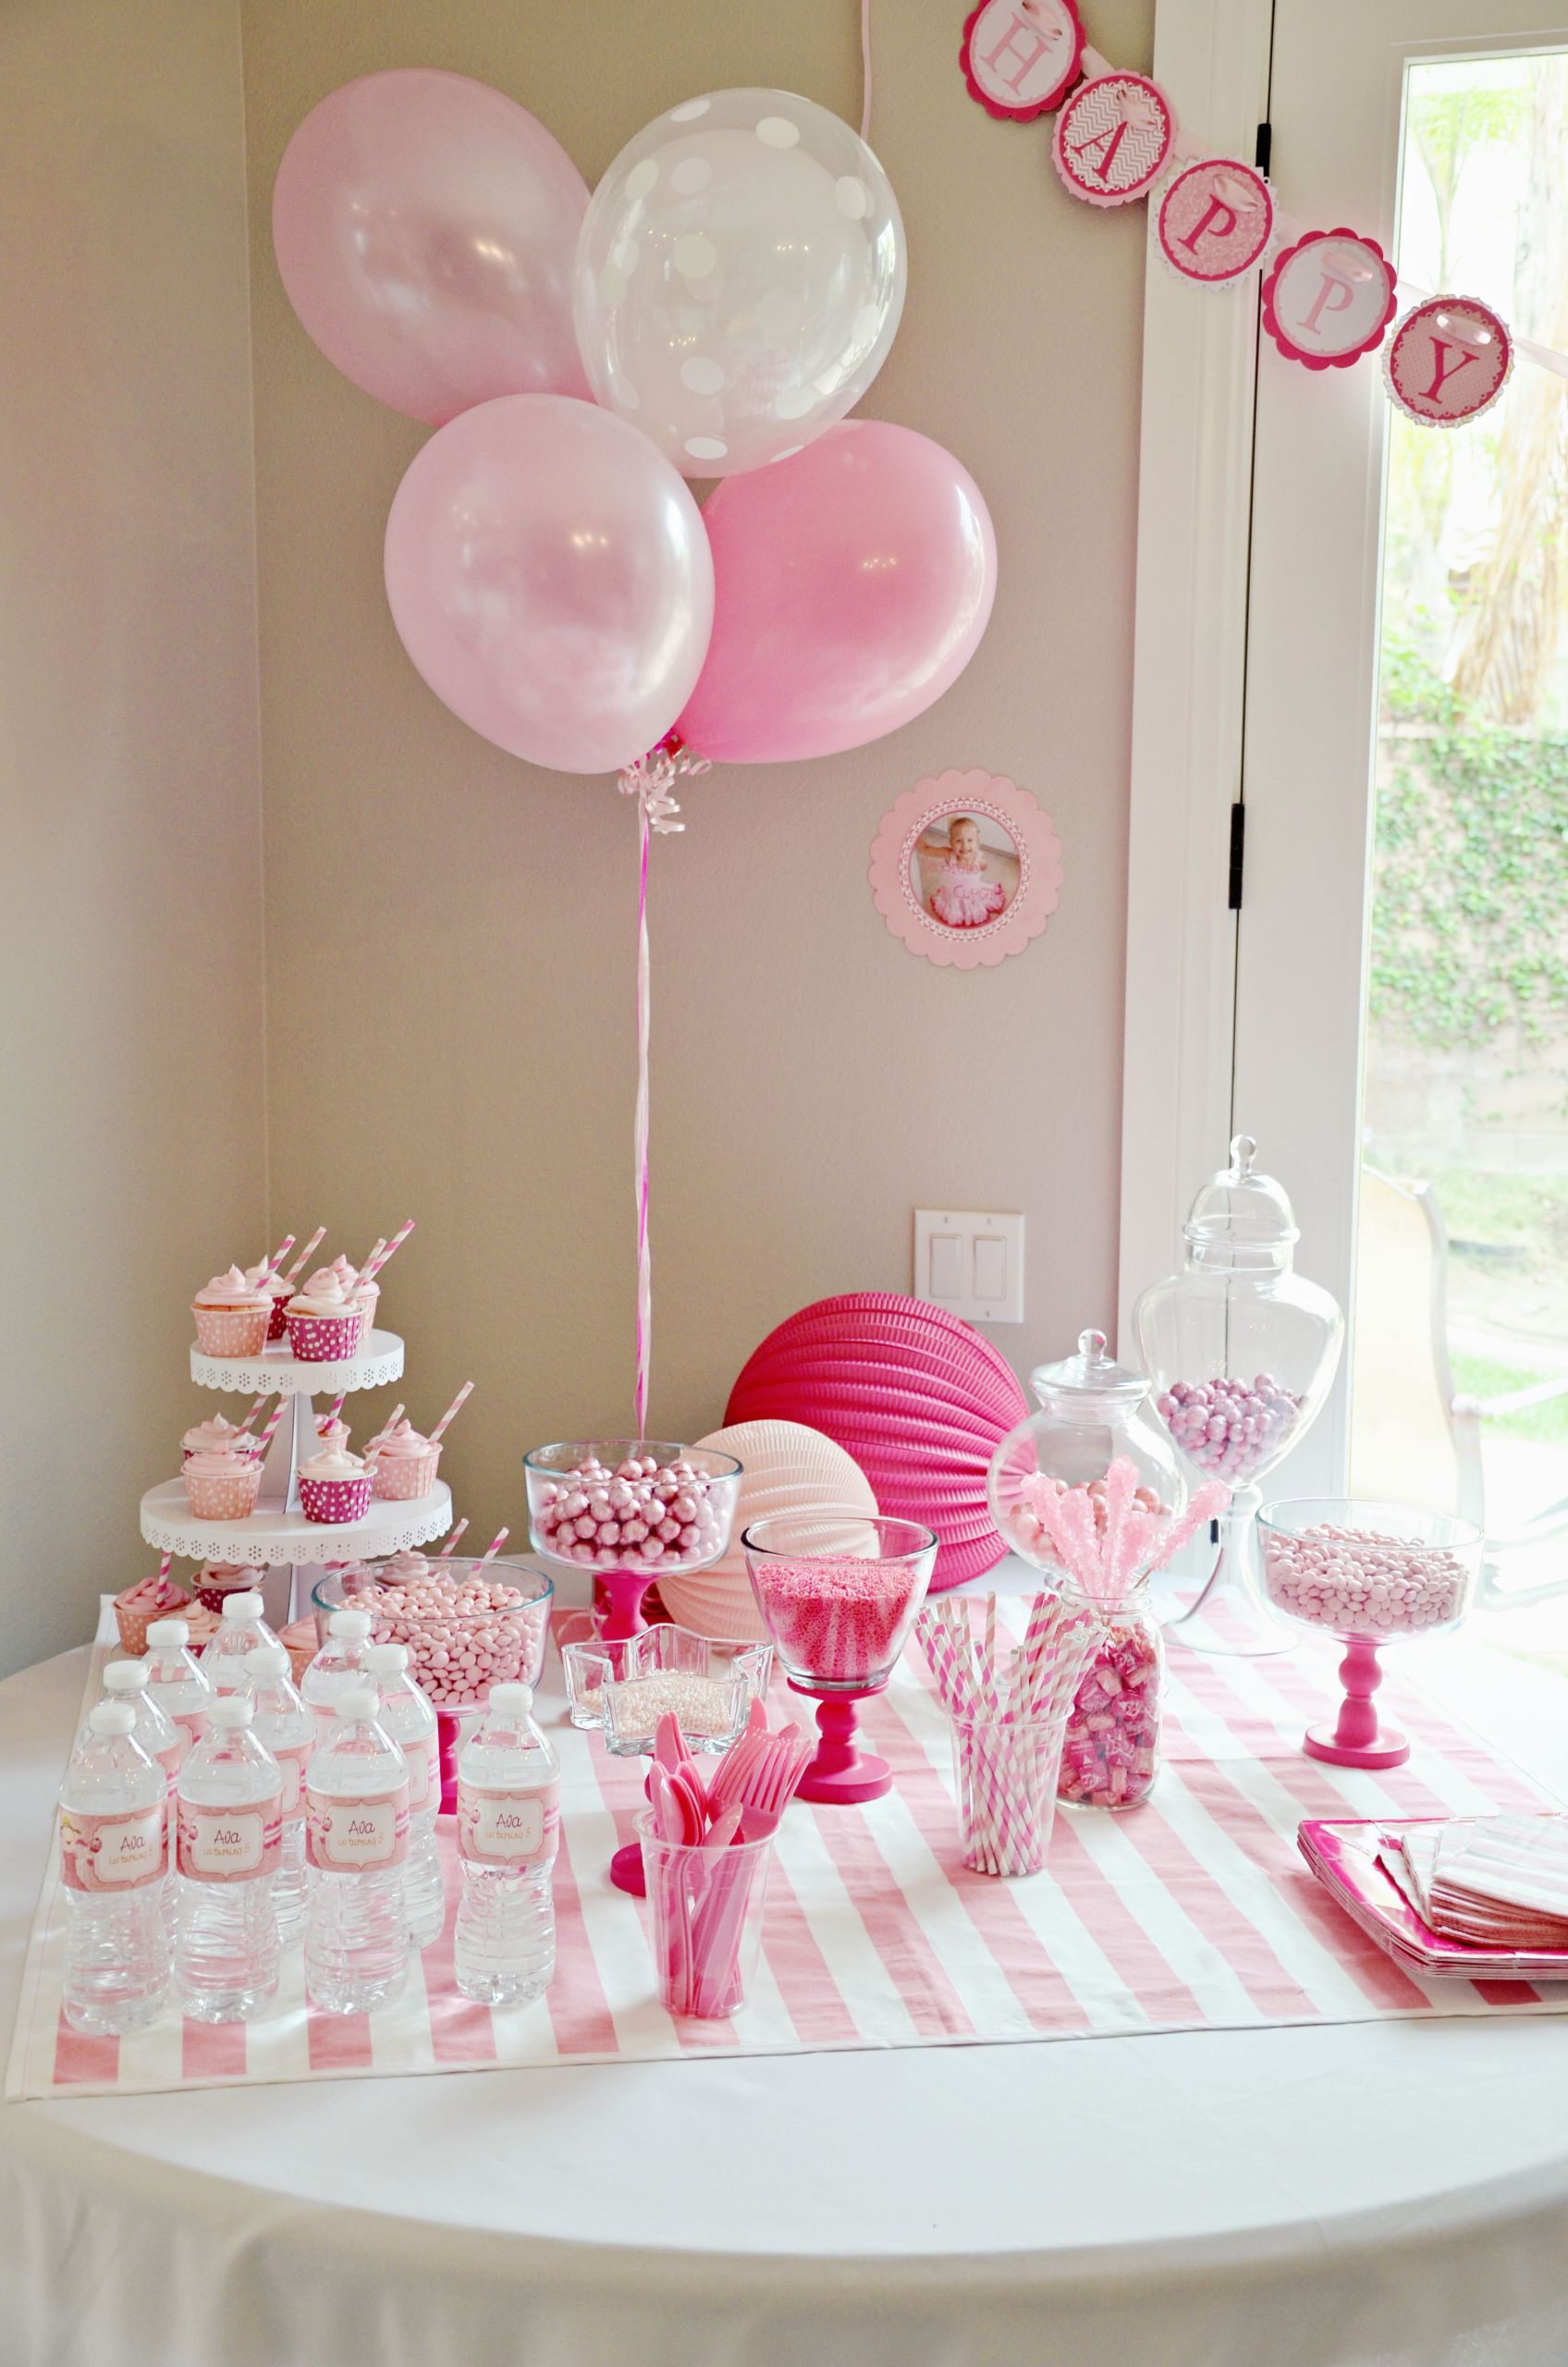 Toddler Birthday Party Ideas 3 Year Old
 Birthday Ideas For 3 Yr Old Girl